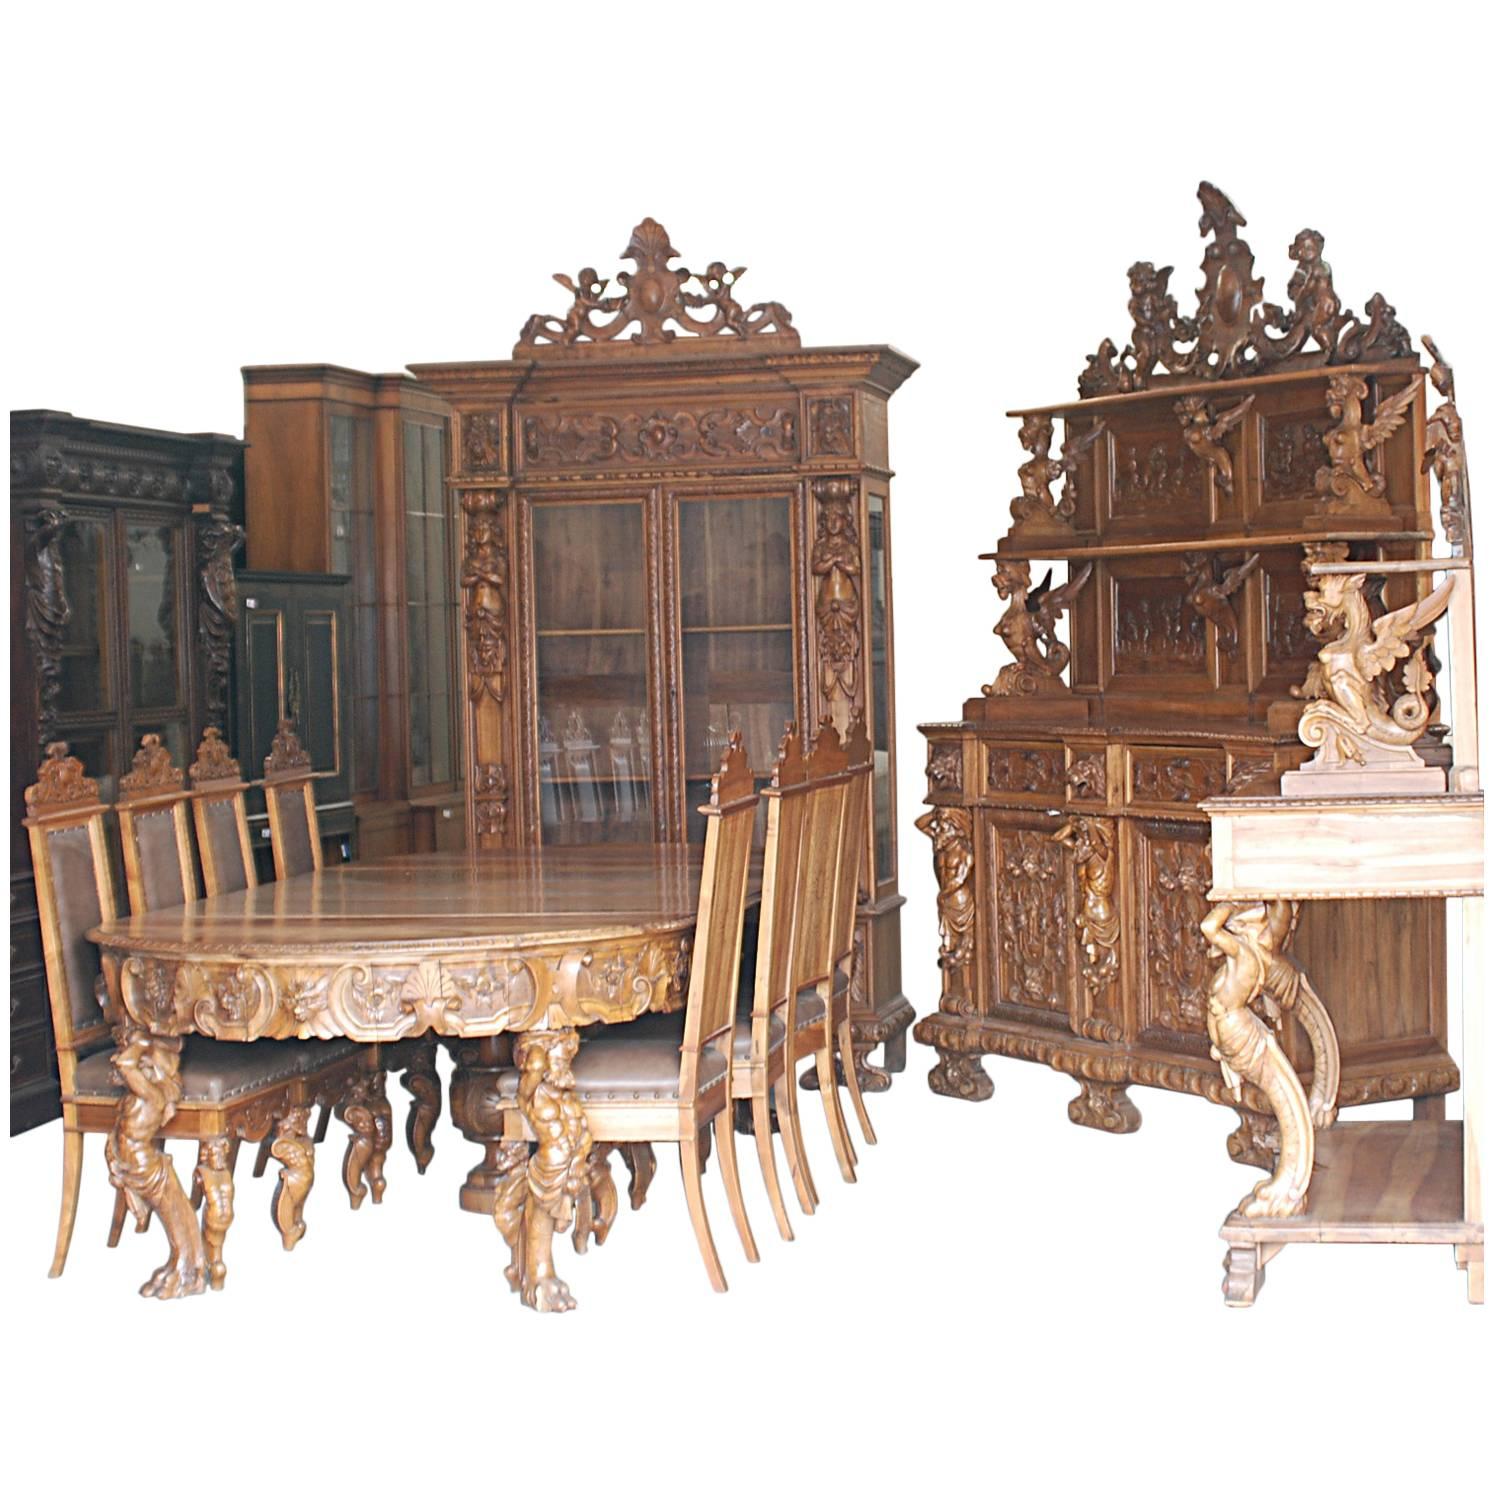 Magnificent 14 Piece Italian Renaissance Style Dining Room Set For Sale